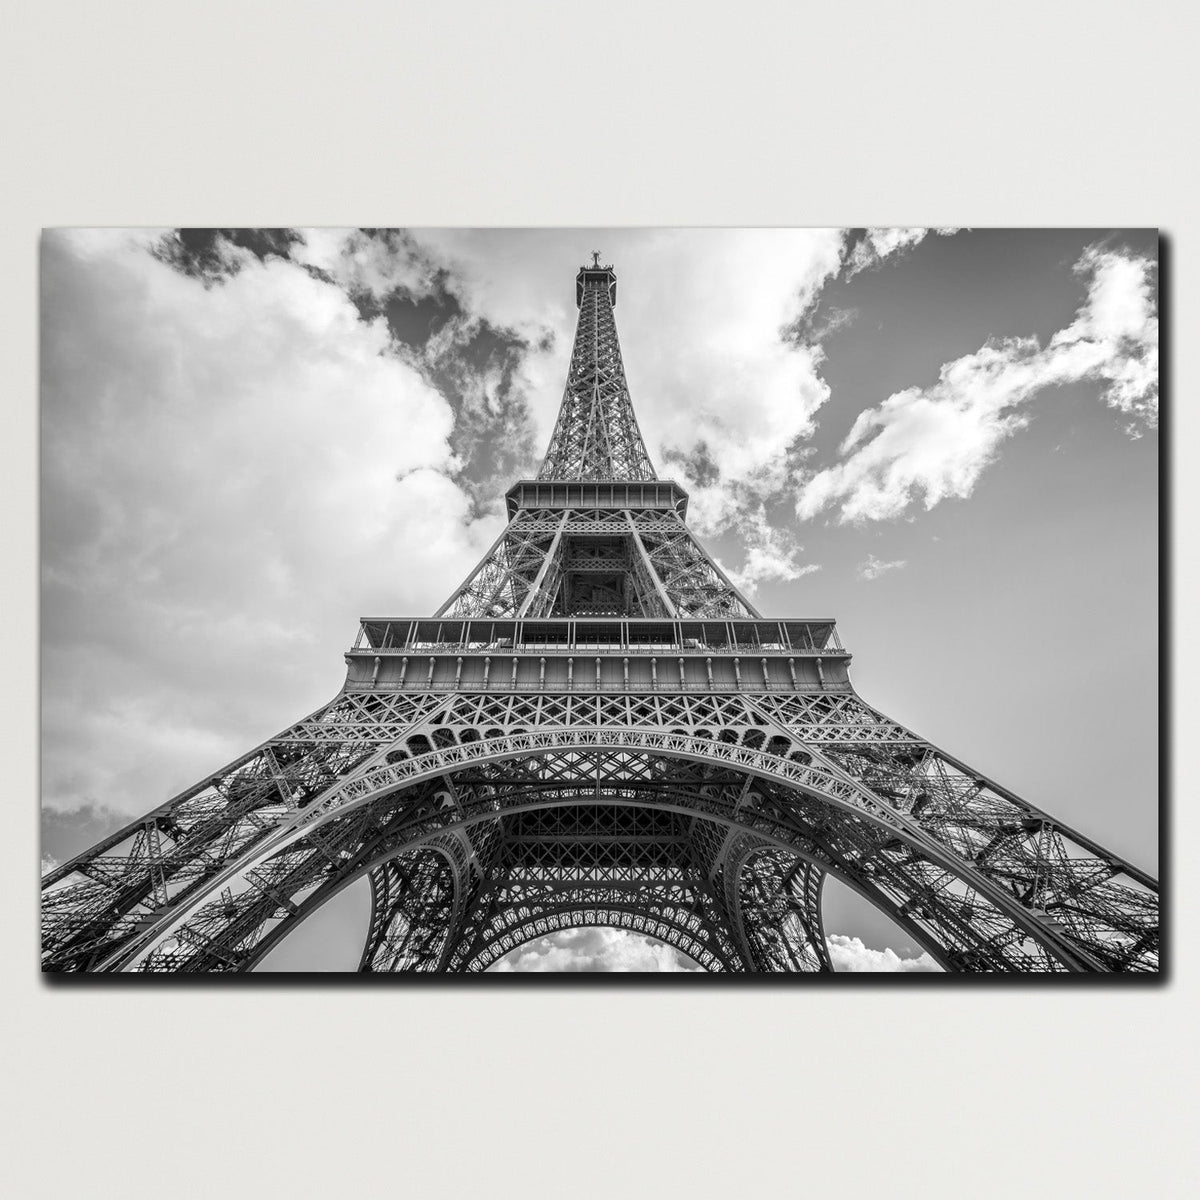 https://cdn.shopify.com/s/files/1/0387/9986/8044/products/TheIconicEiffelTowerCanvasArtprintStretched-Plain.jpg